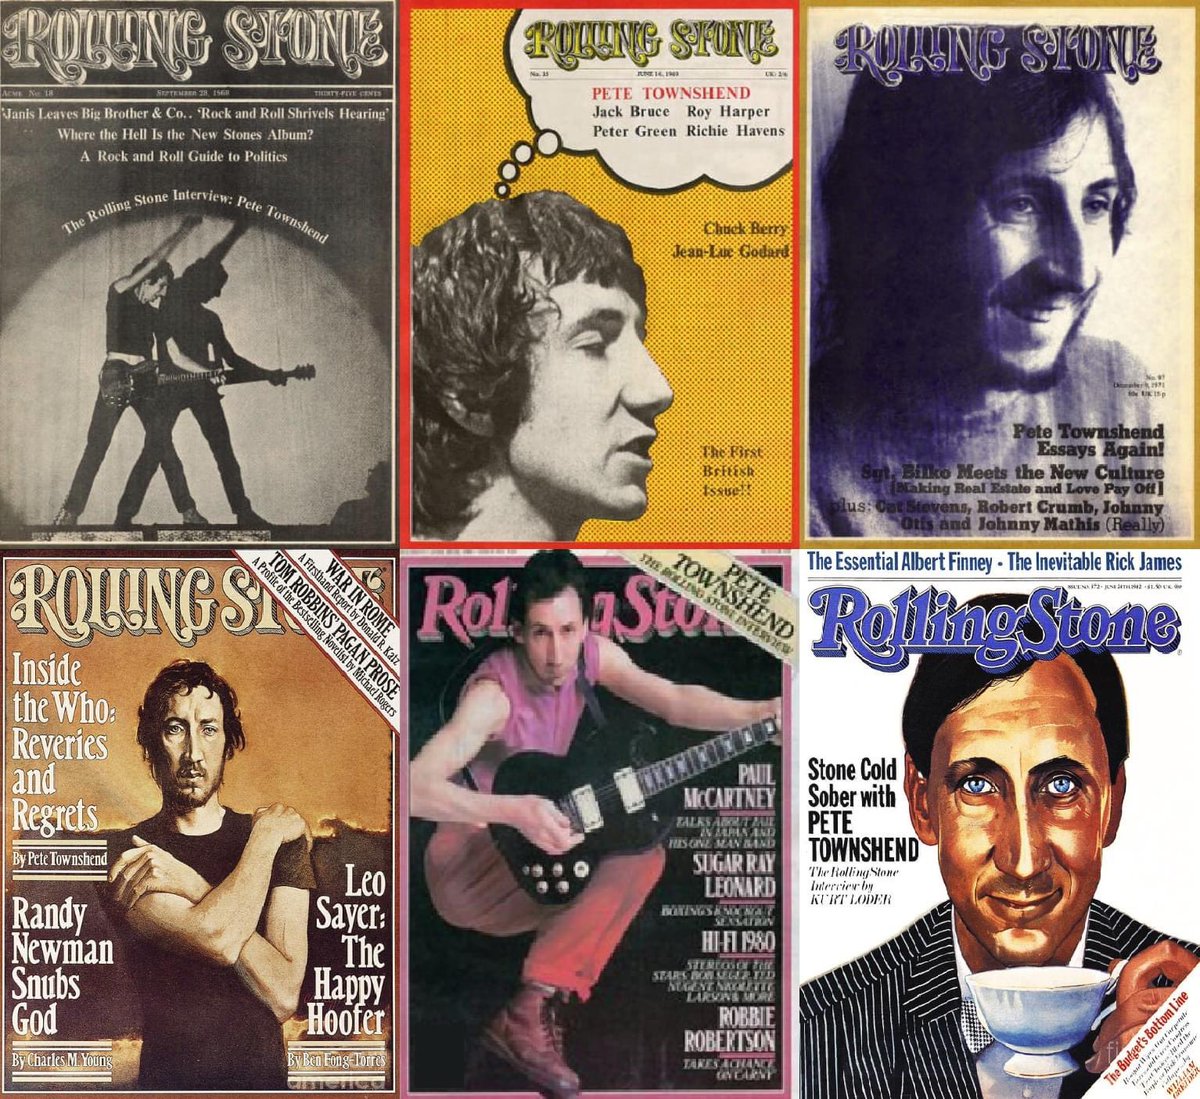 Pete Townshend on the cover of the Rolling Stone